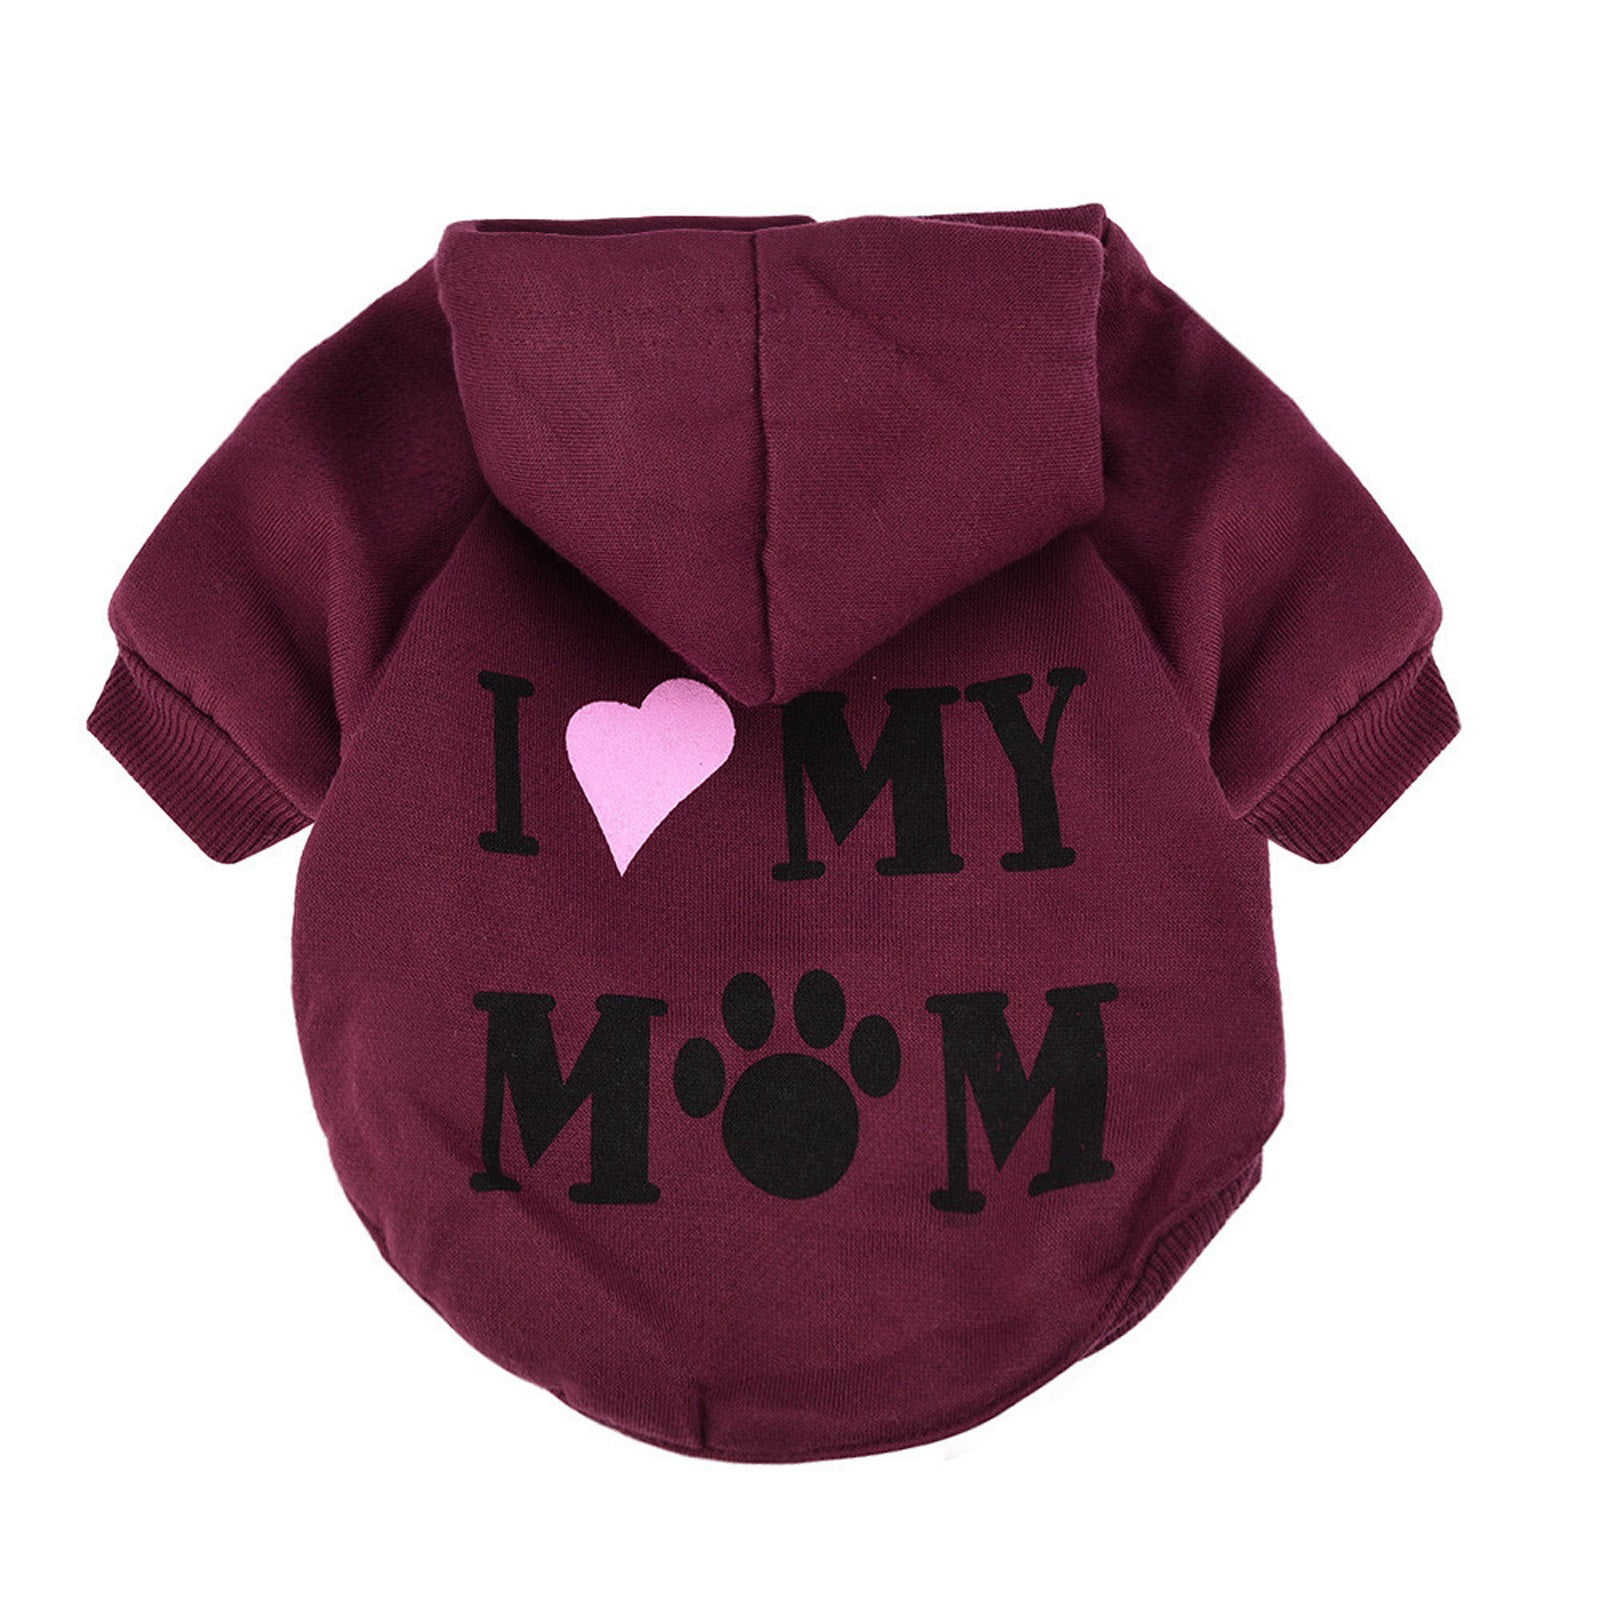 Puppy T-Shirt Puppy Pet Fashion Costume for Small Dog Banstore Dog Clothing